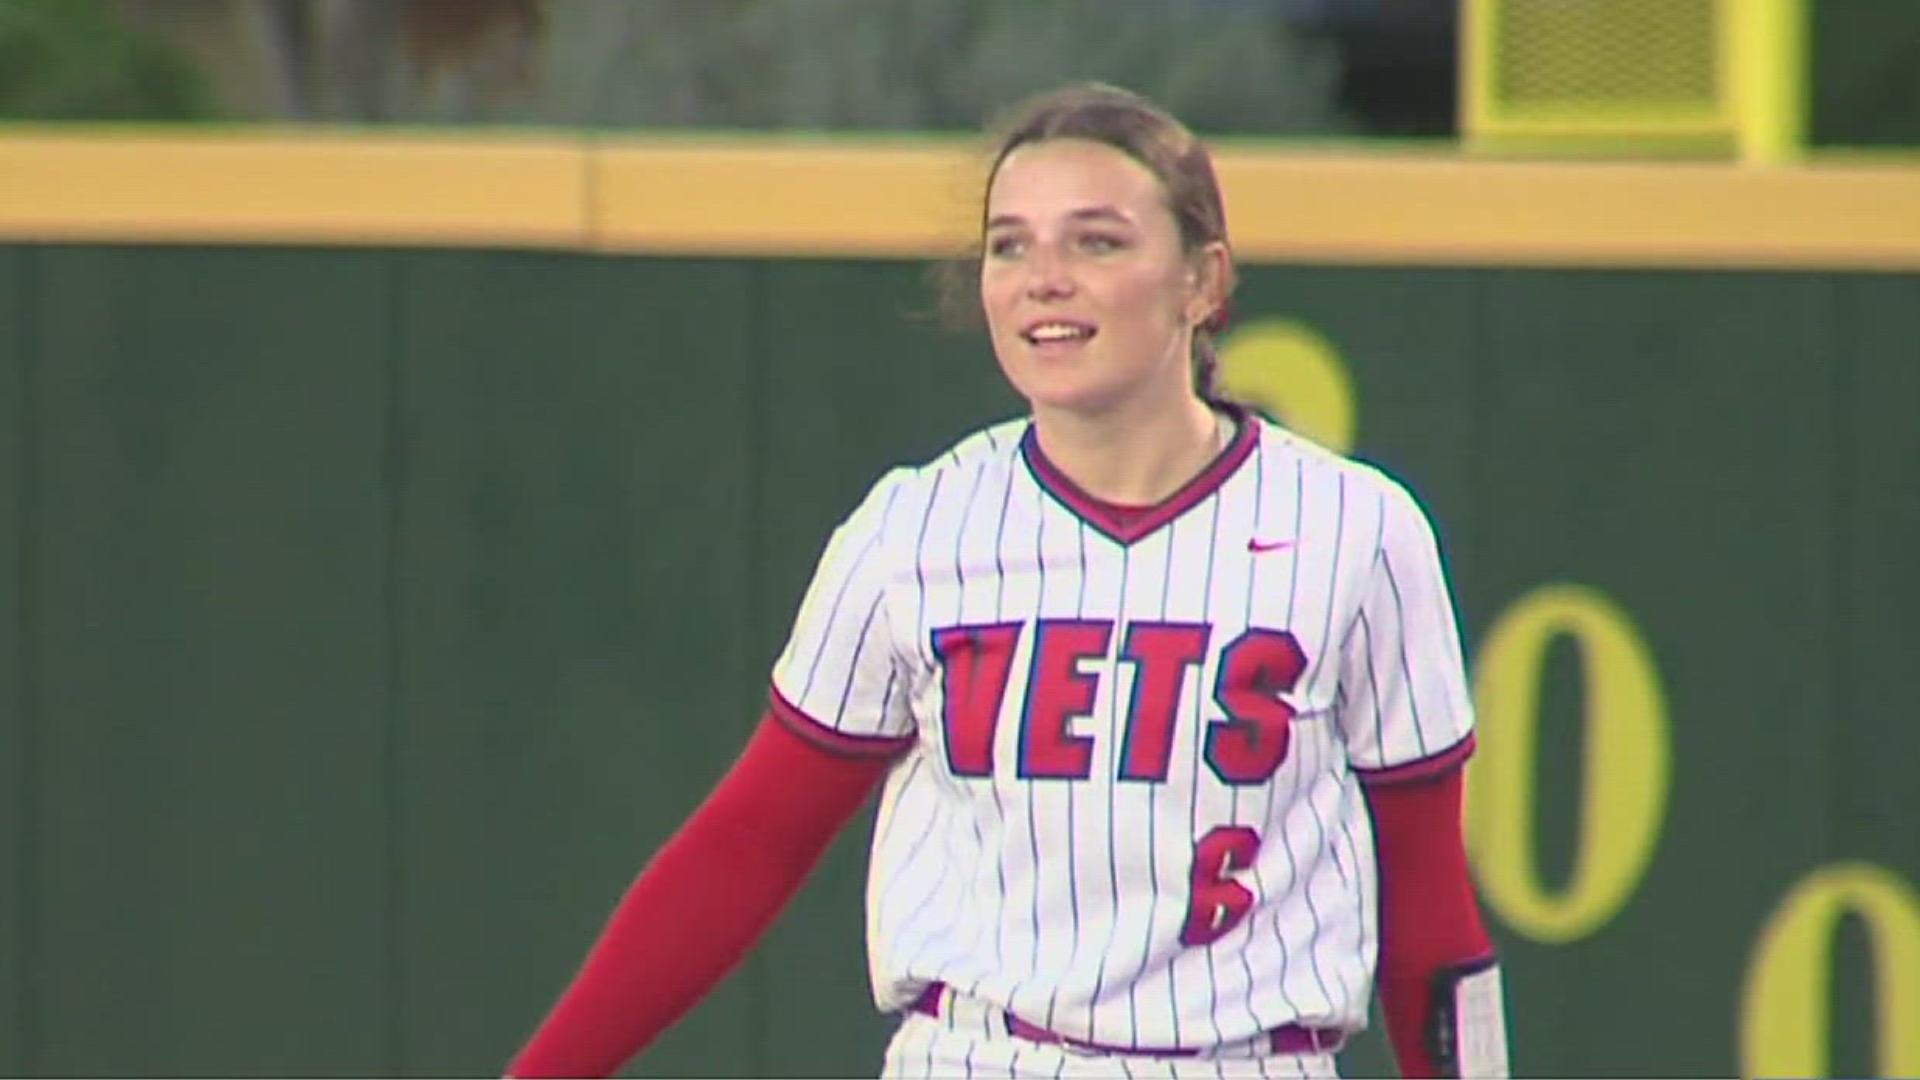 Parker Malone is improving her skills as she practices with Islanders Baseball players.